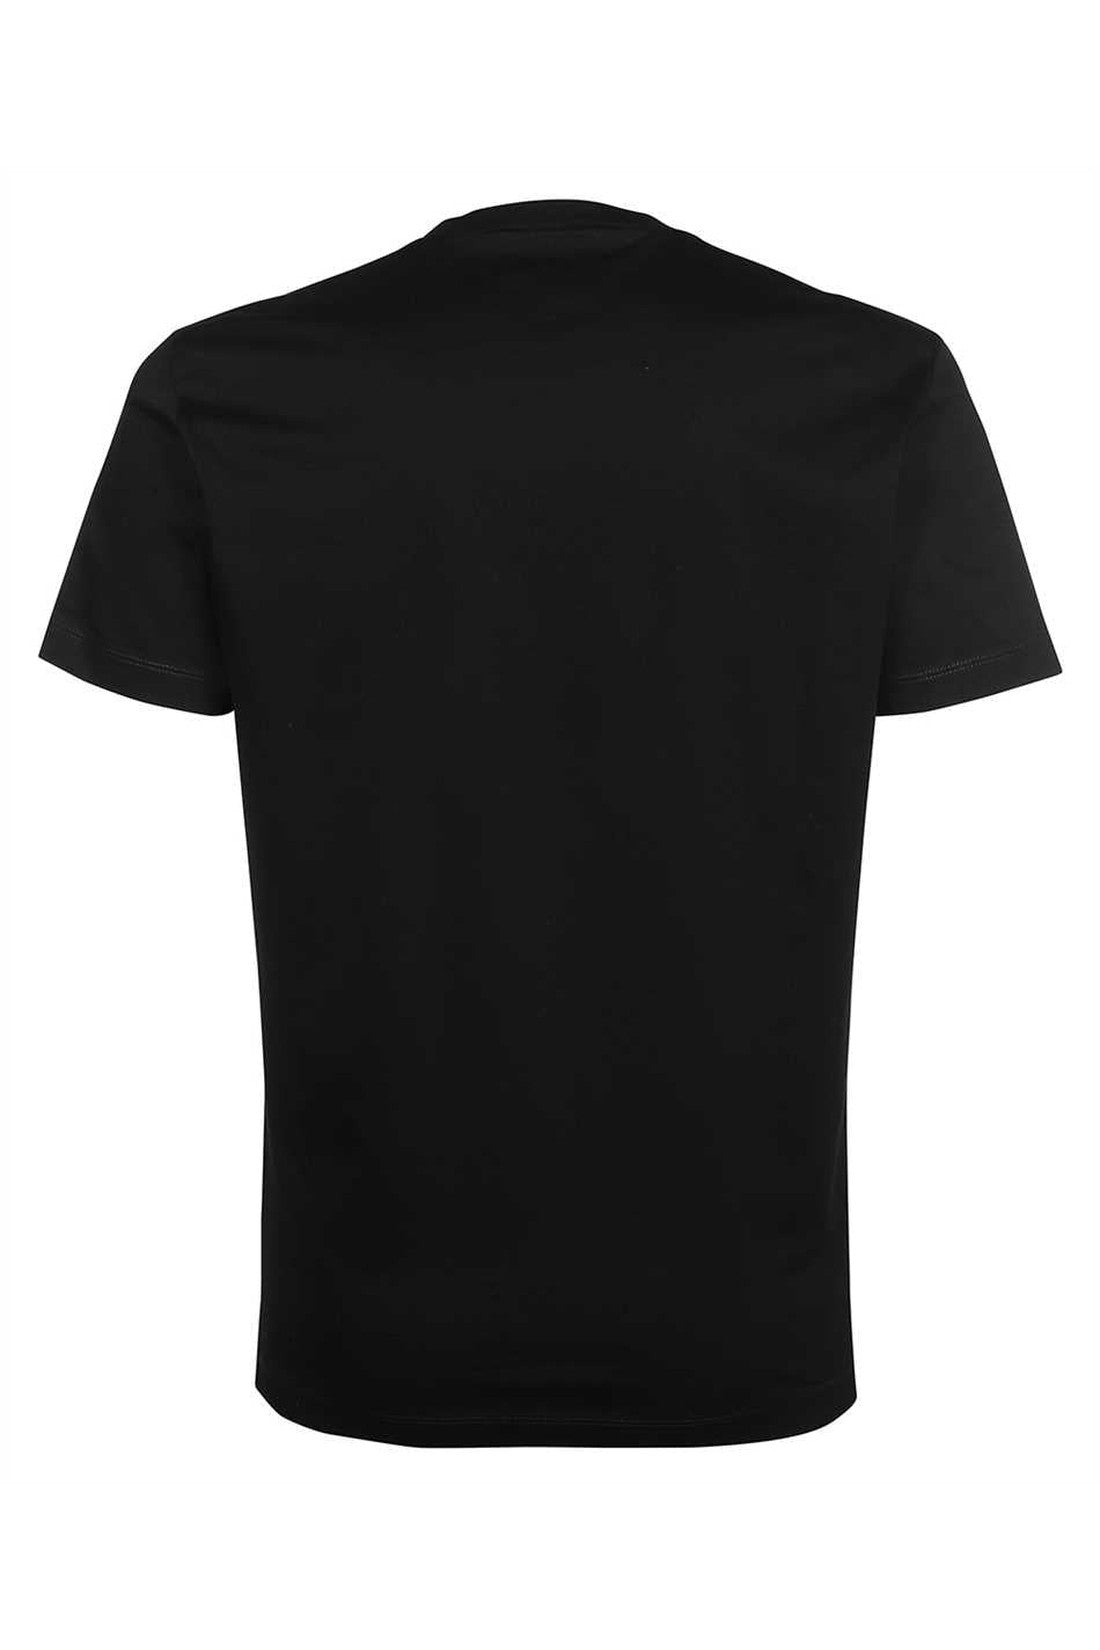 Dsquared2-OUTLET-SALE-Crew-neck-t-shirt-Shirts-ARCHIVE-COLLECTION-2_00f90387-a878-43fe-bf56-e3f5f1d51692.jpg